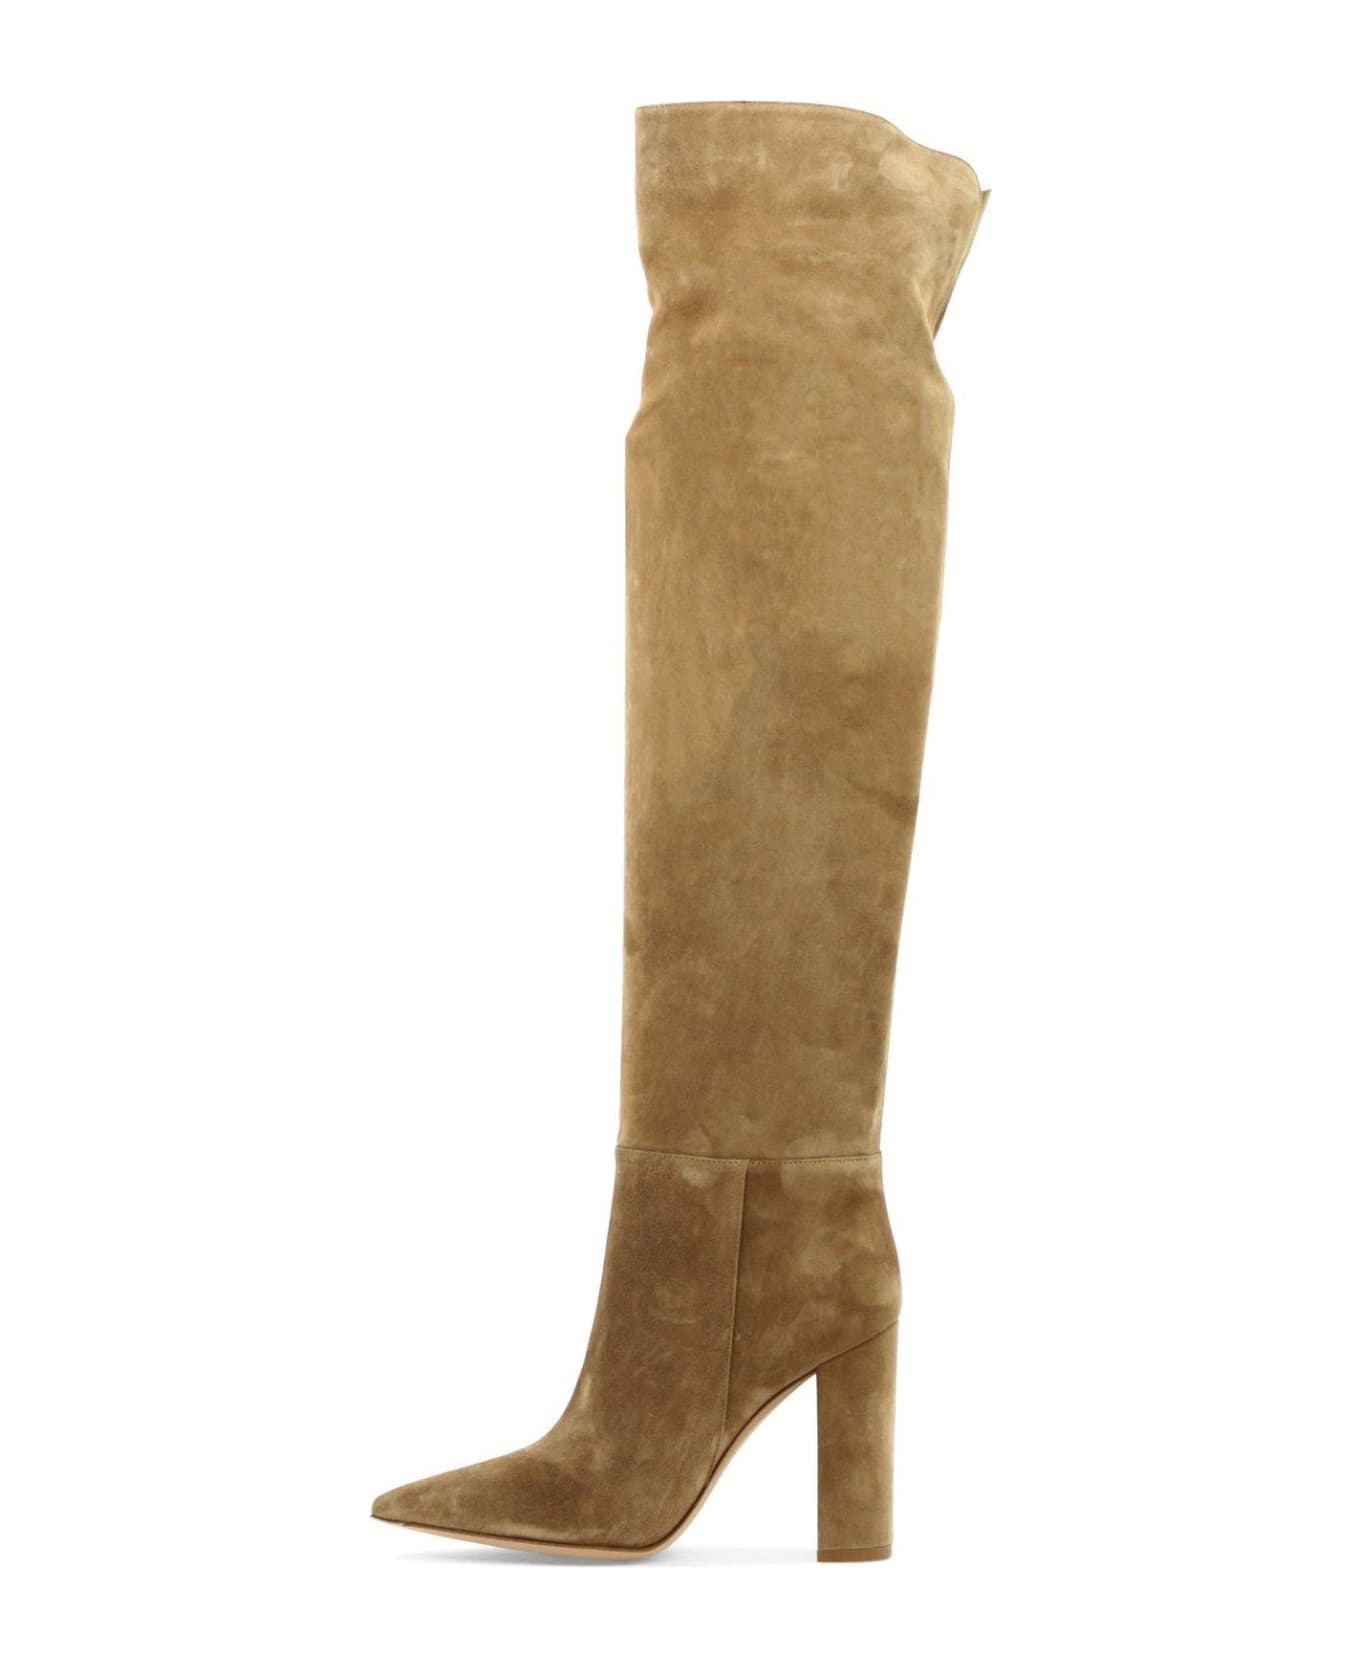 Gianvito Rossi Pointed-toe Heeled Boots - CAMEL